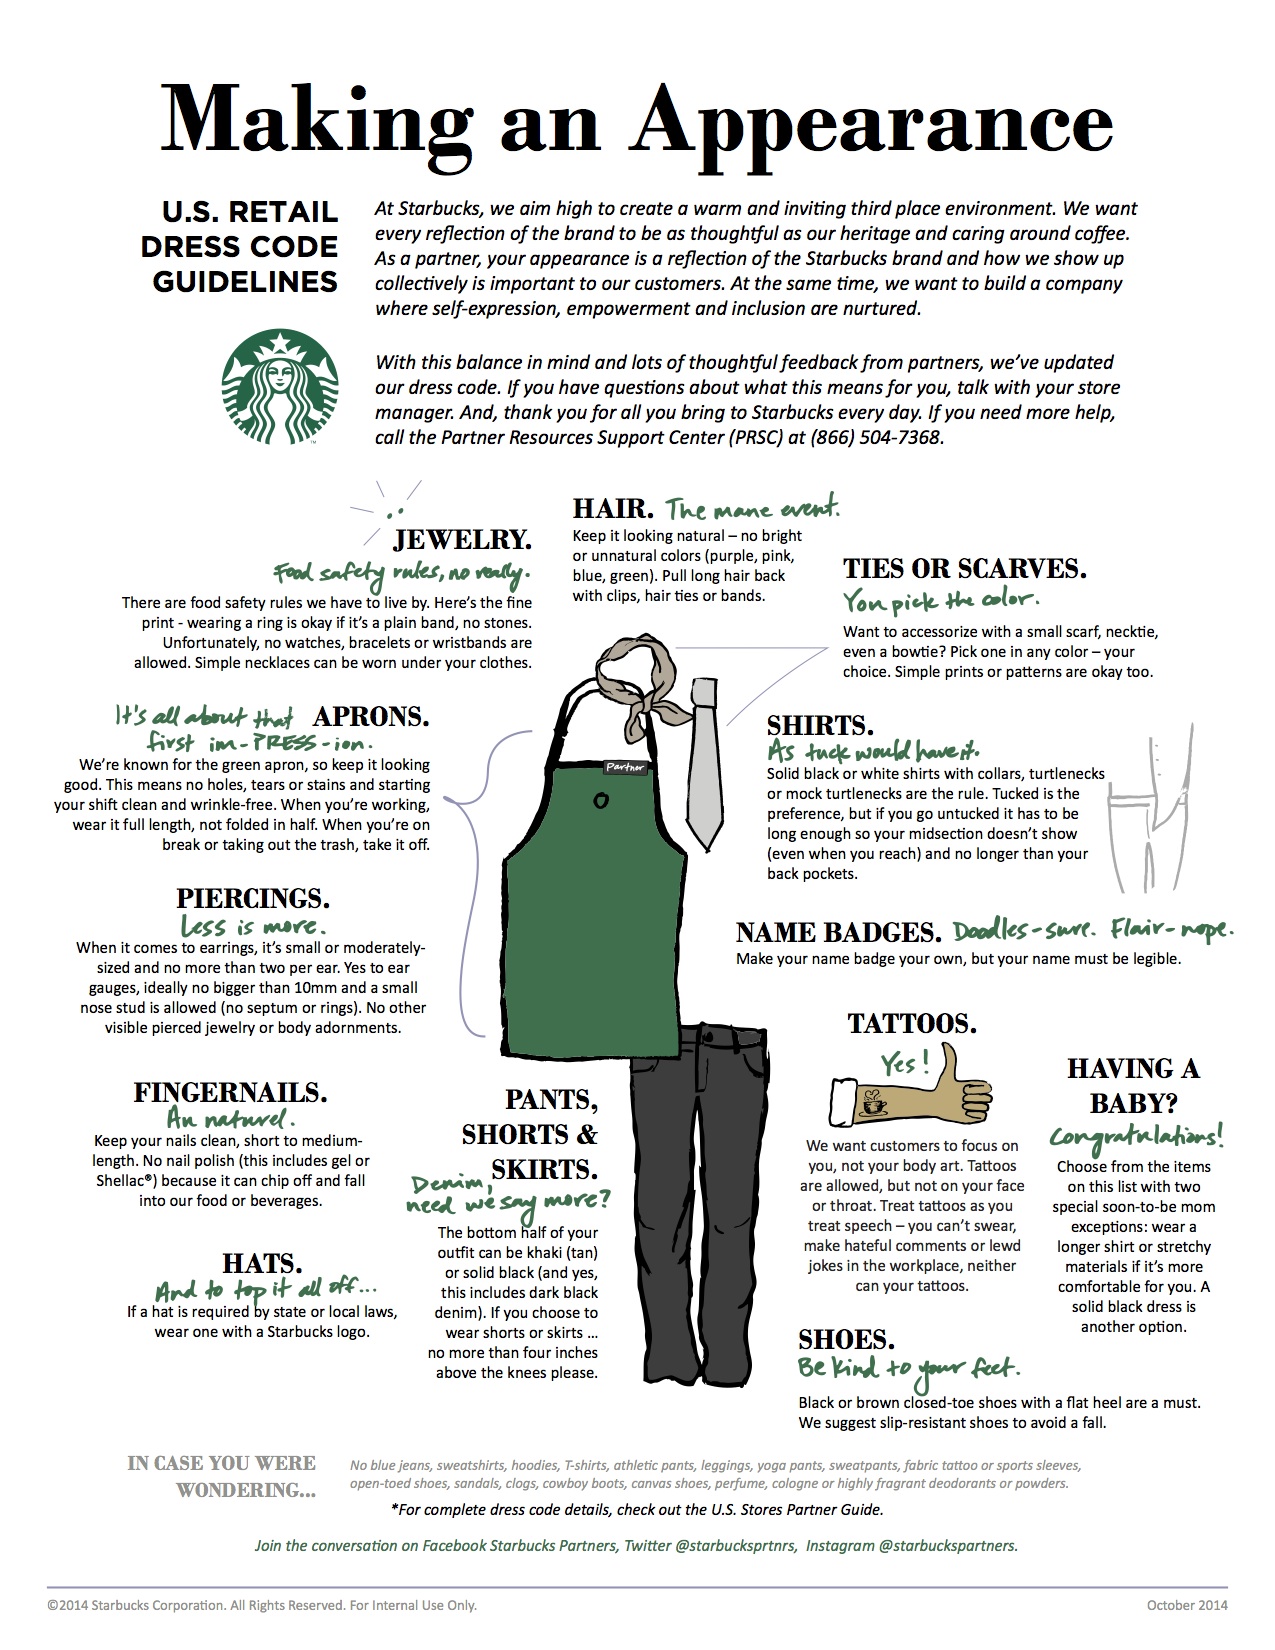 get-ready-to-show-that-ink-baristas-starbucks-changes-policy-to-allow